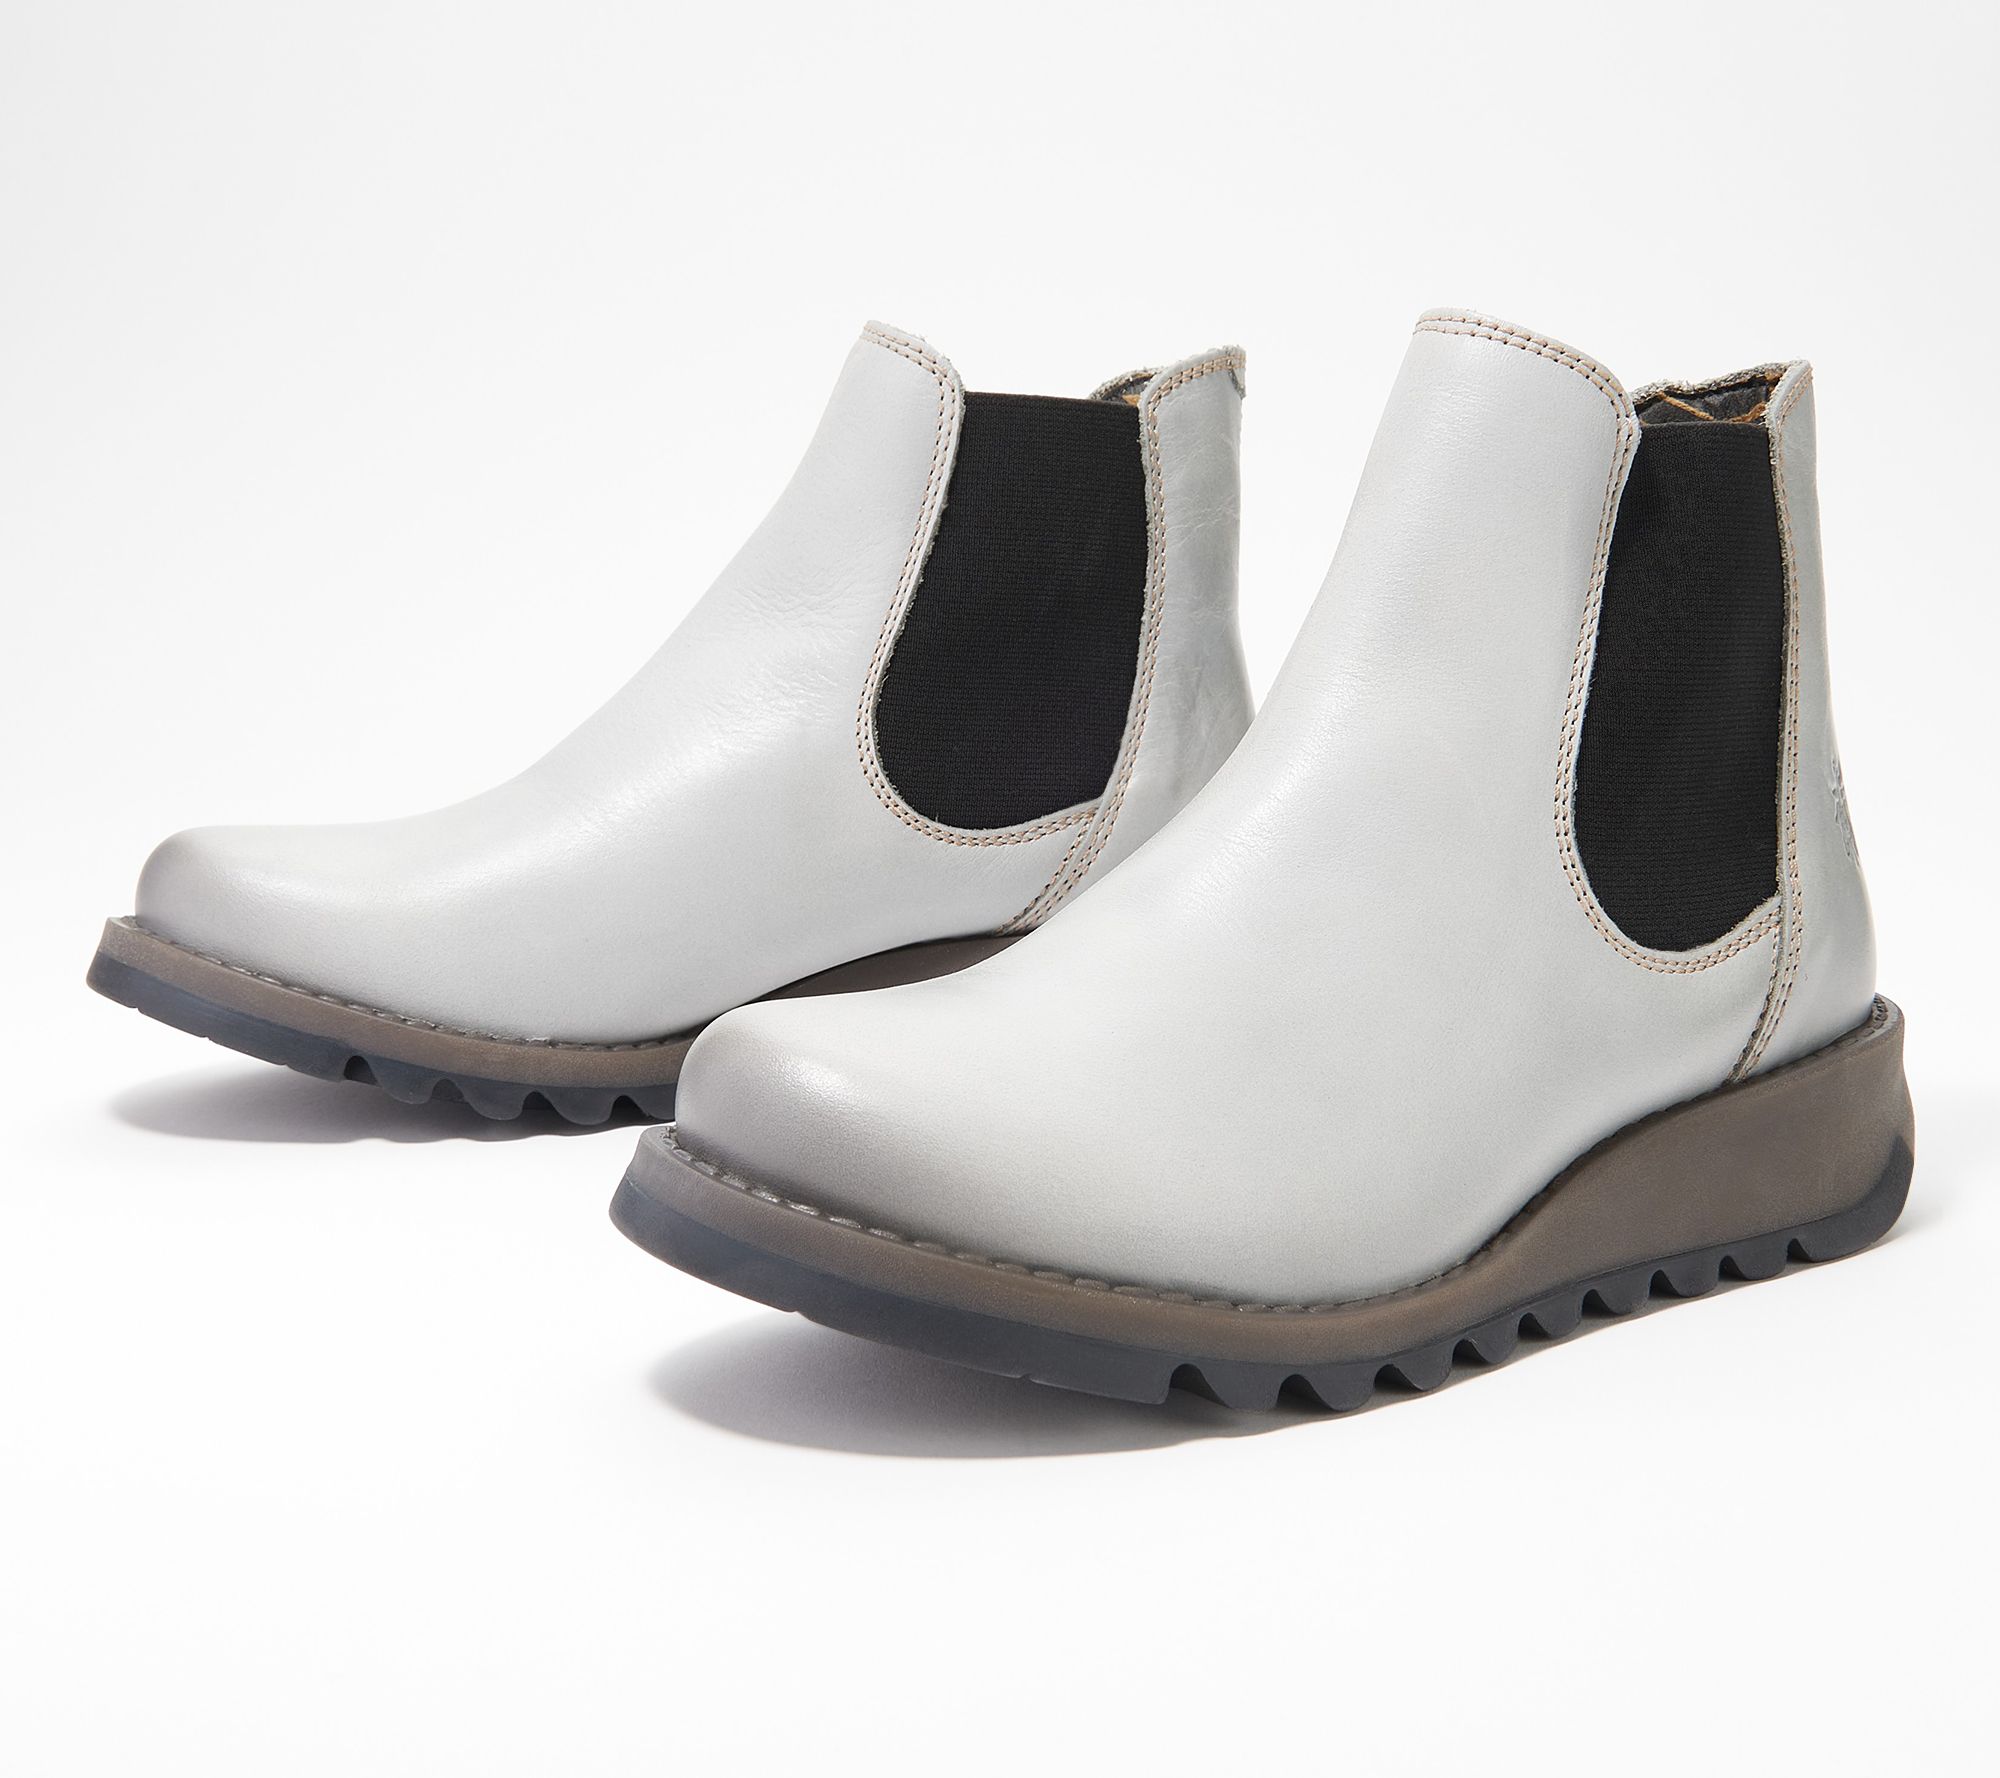 Fly London Chelsea Boots